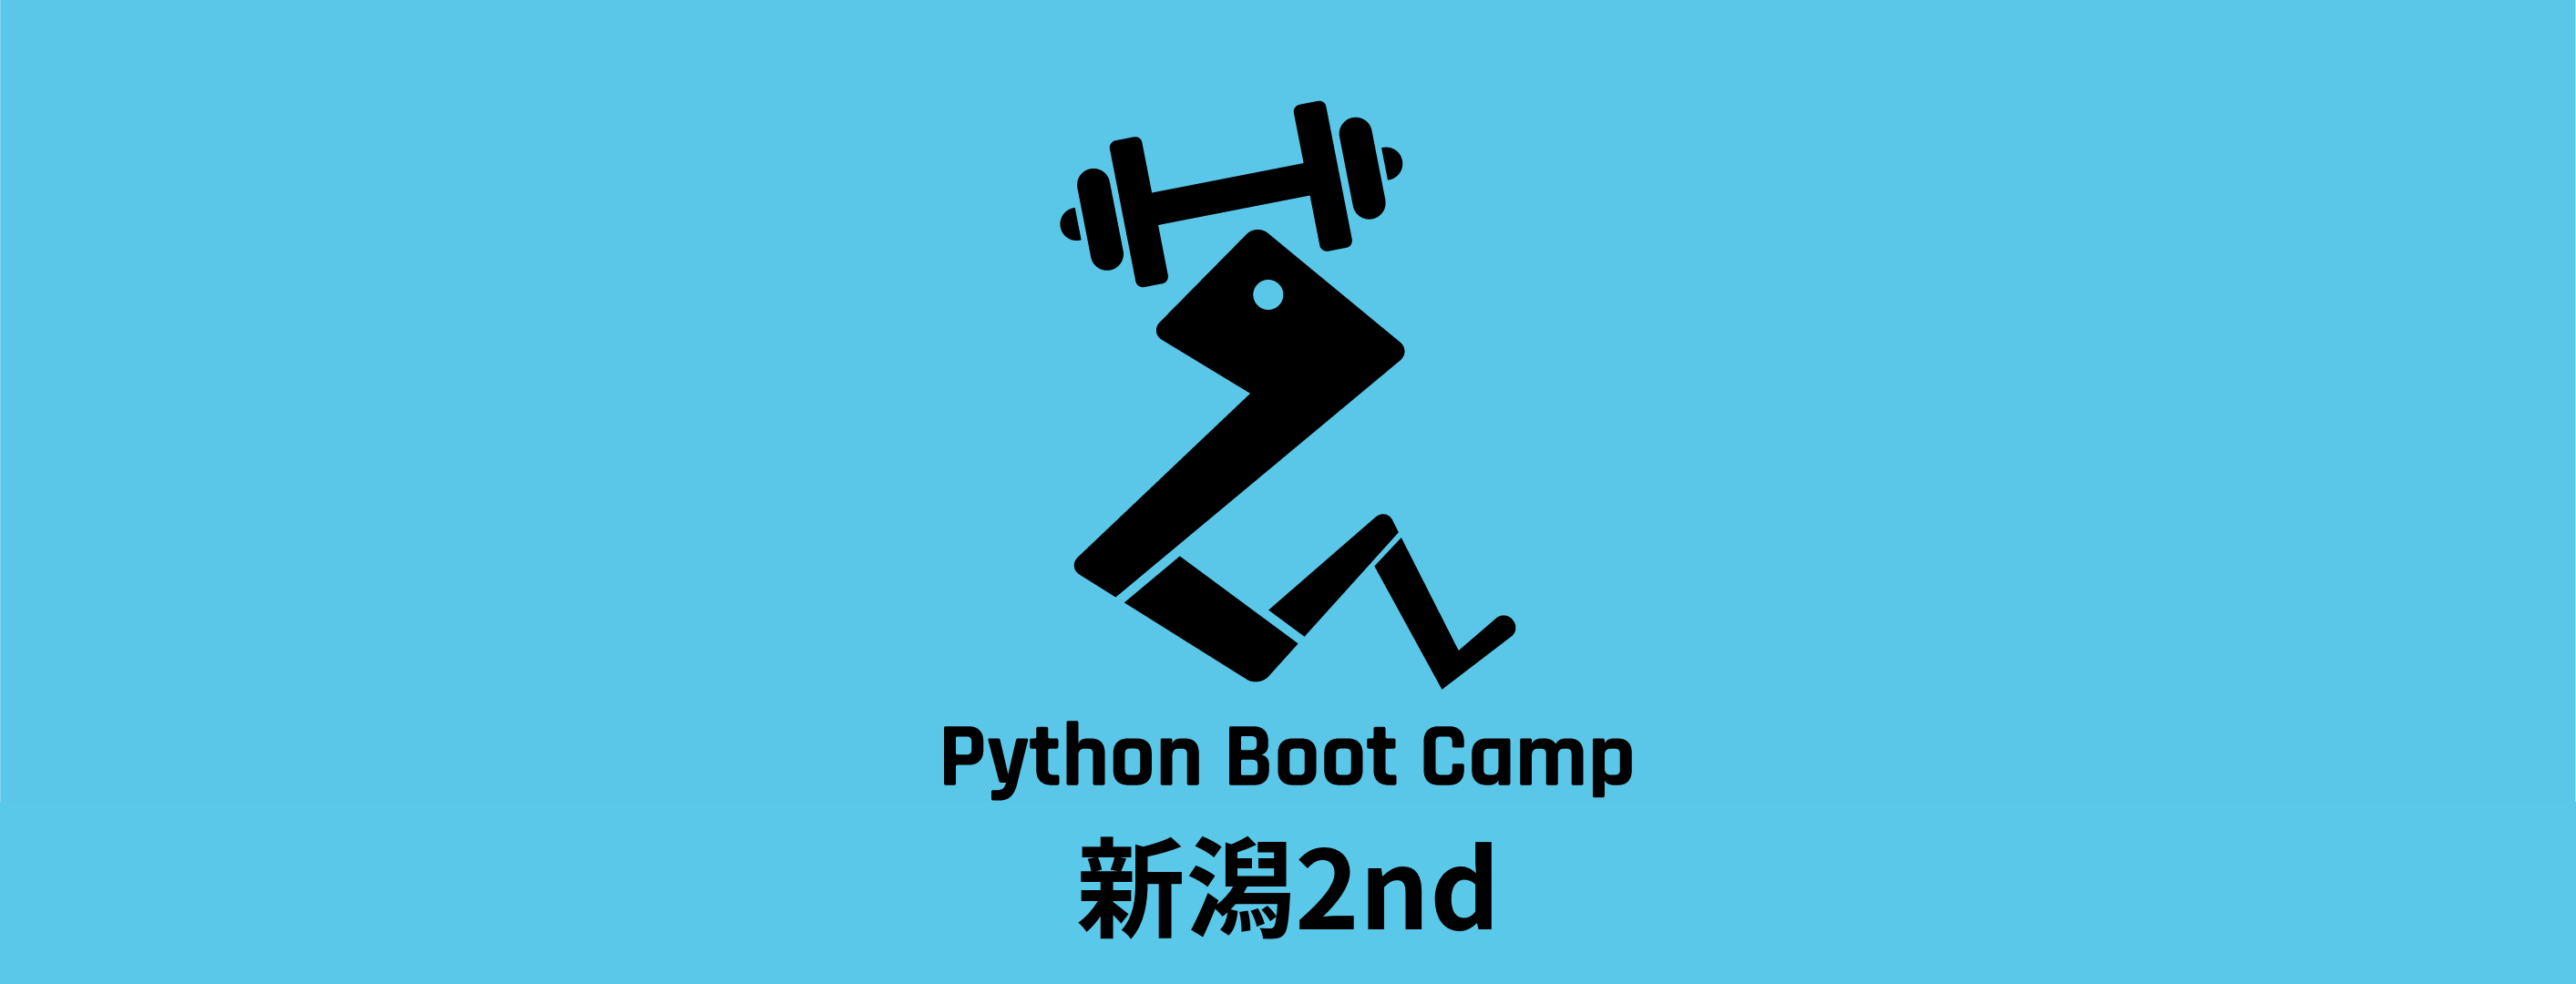 Python Boot Camp in 新潟2nd